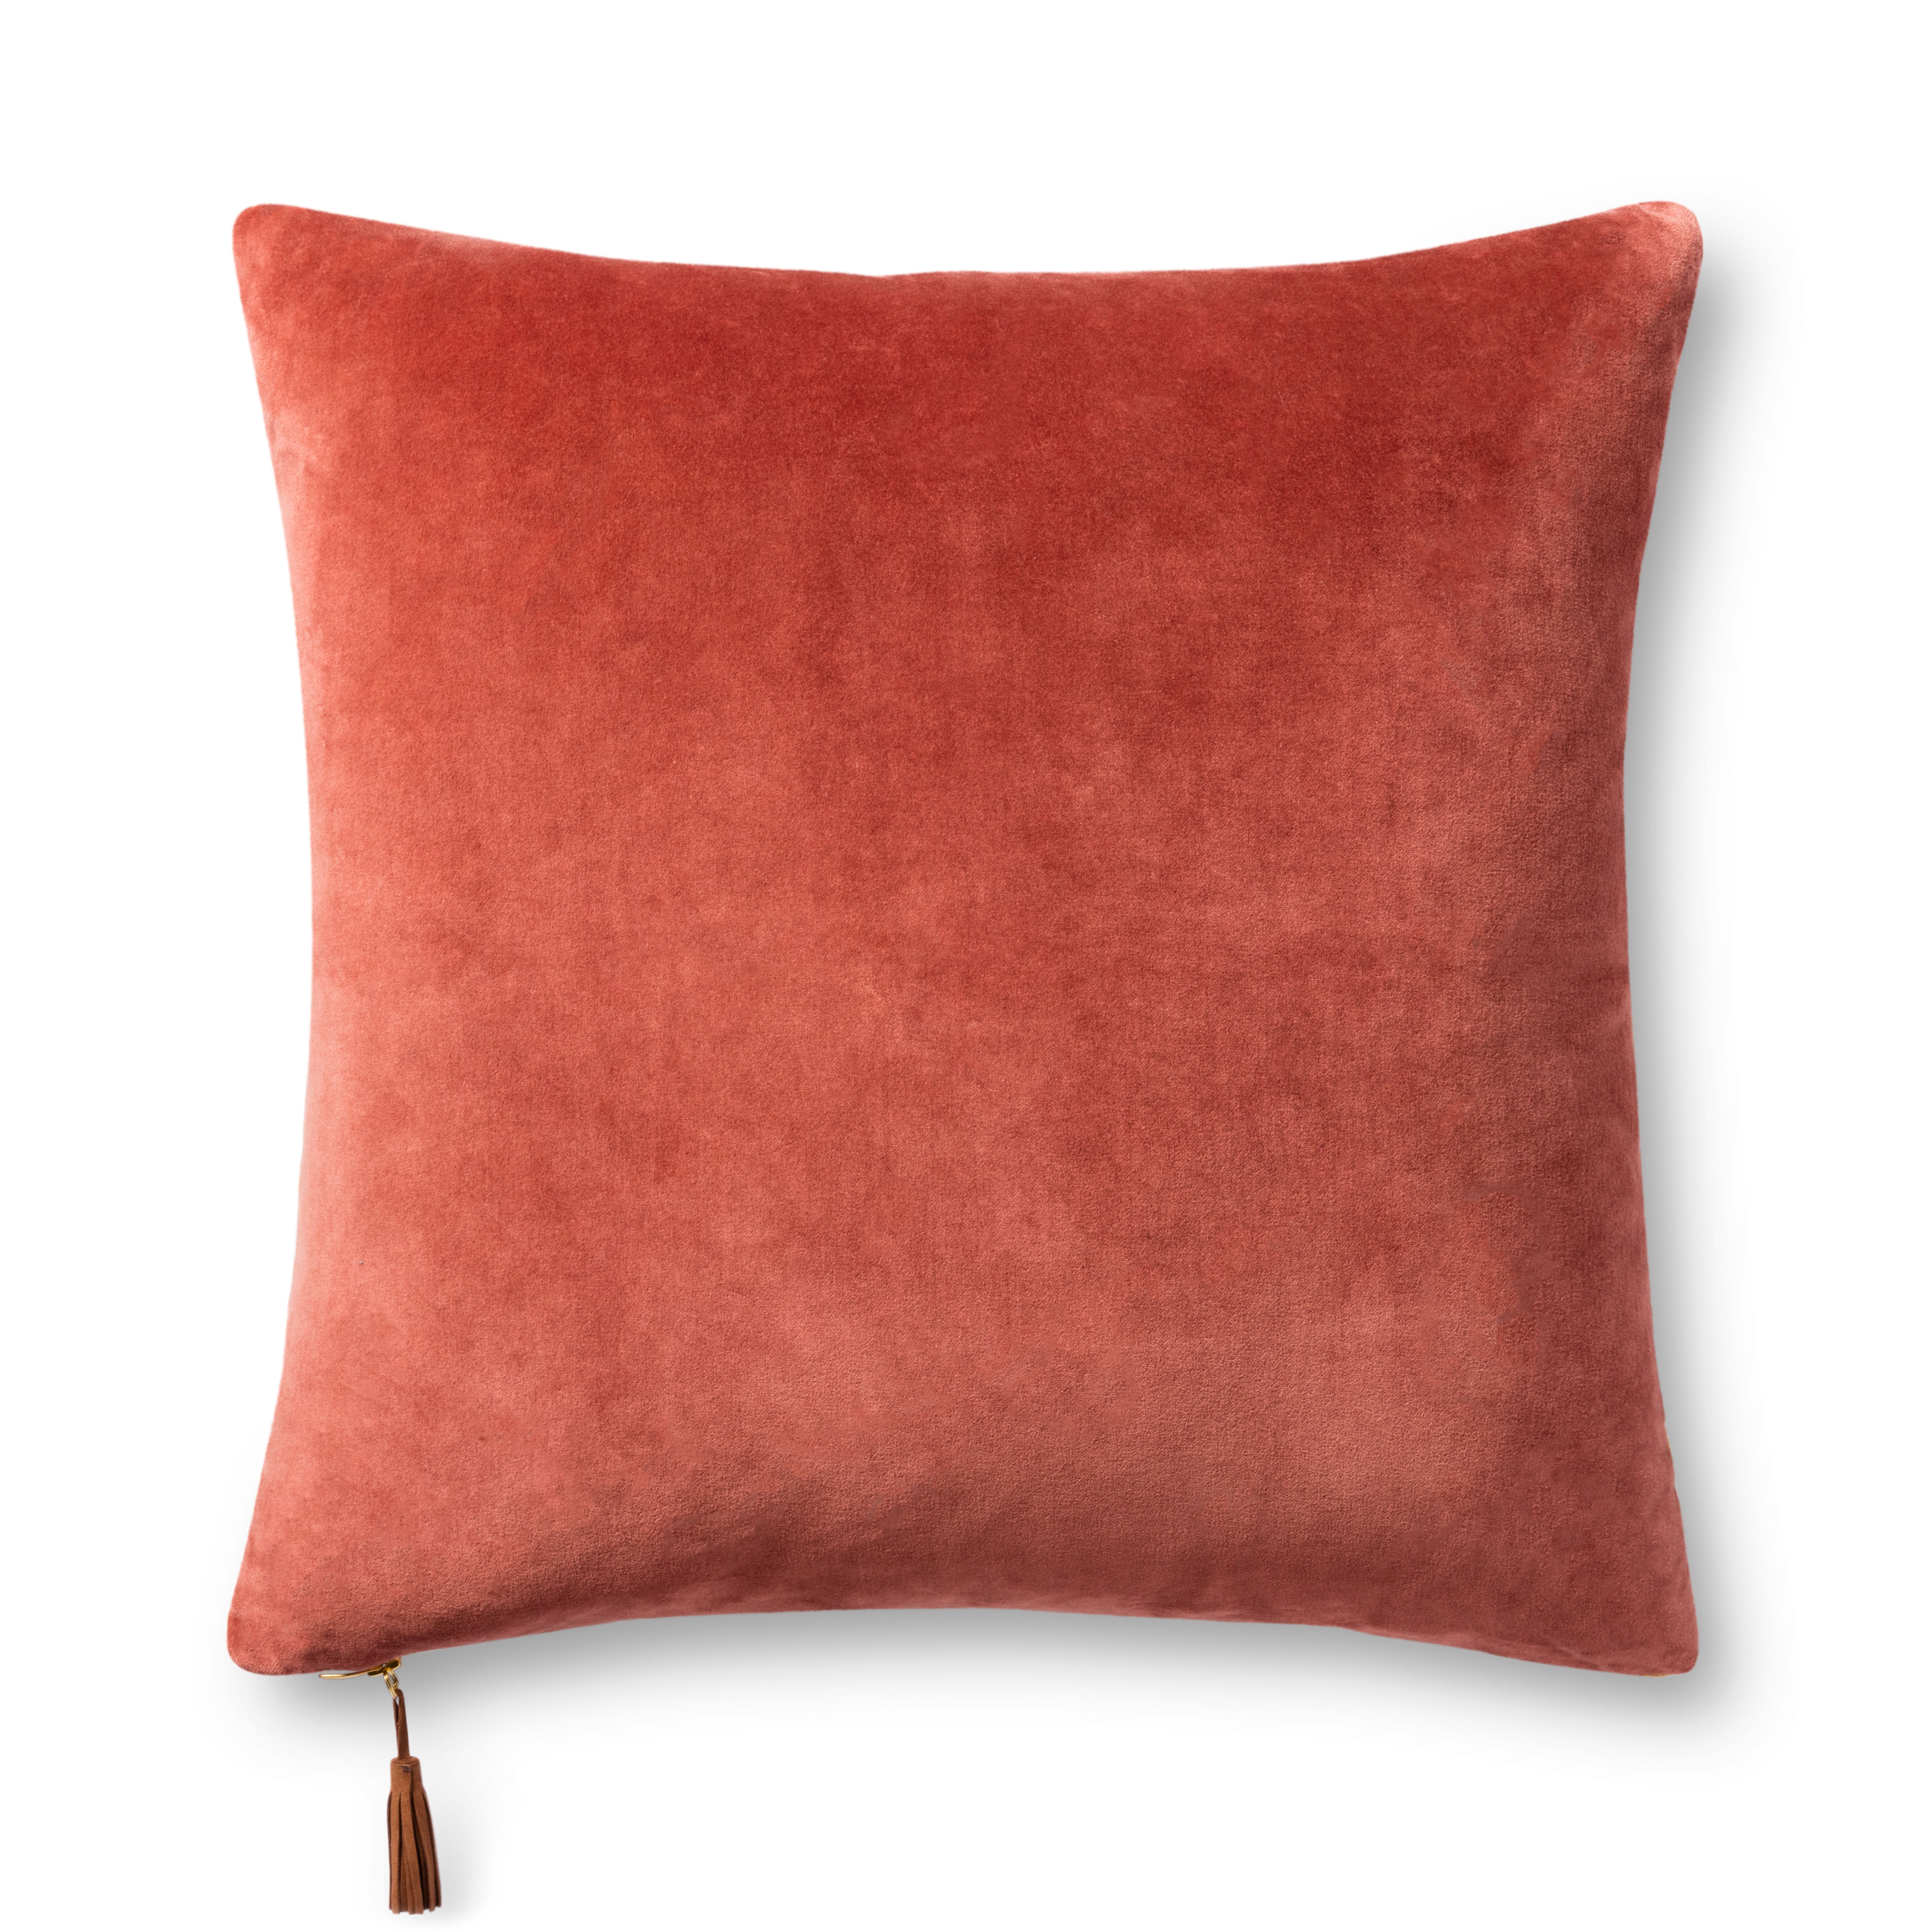 PILLOWS P1153 RUST / GOLD 22" x 22" Cover Only - Image 0